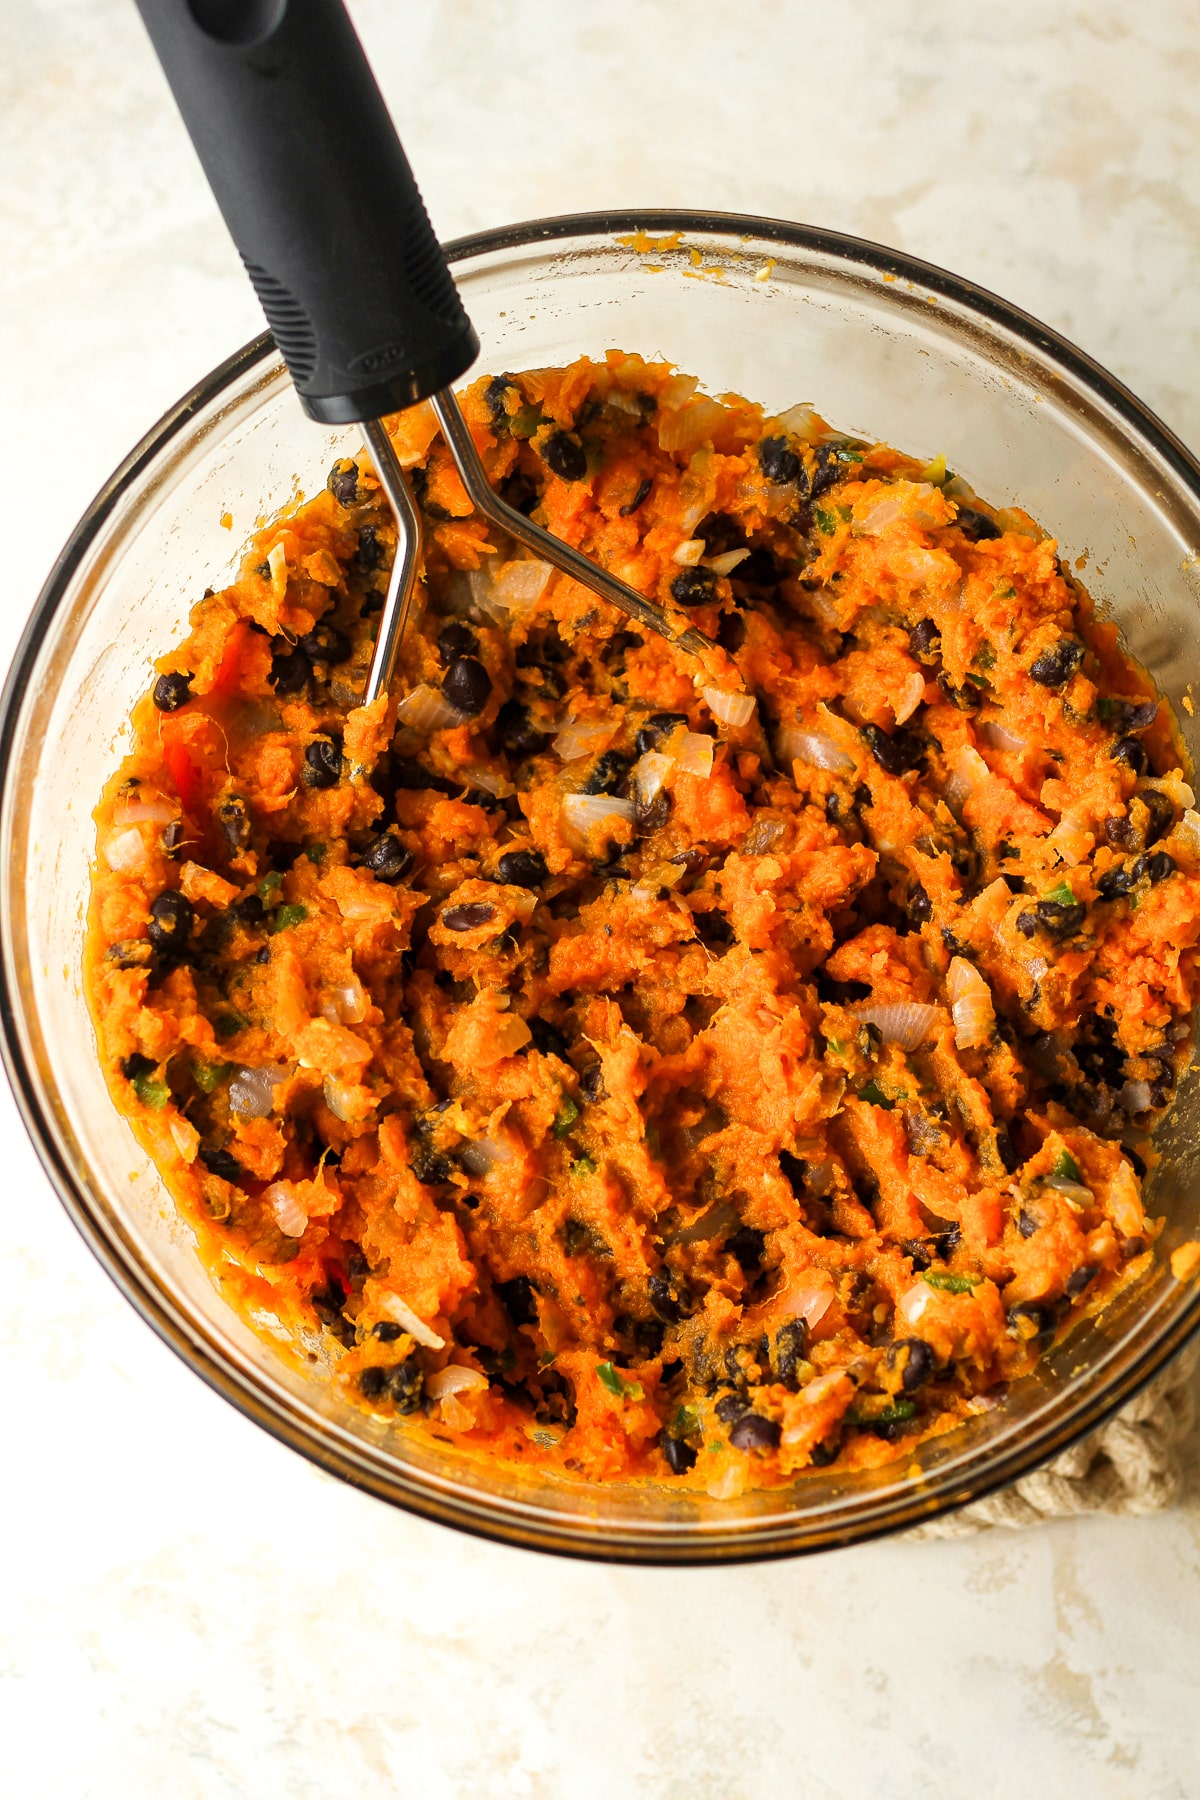 A bowl of the sweet potato and veggie mixture.